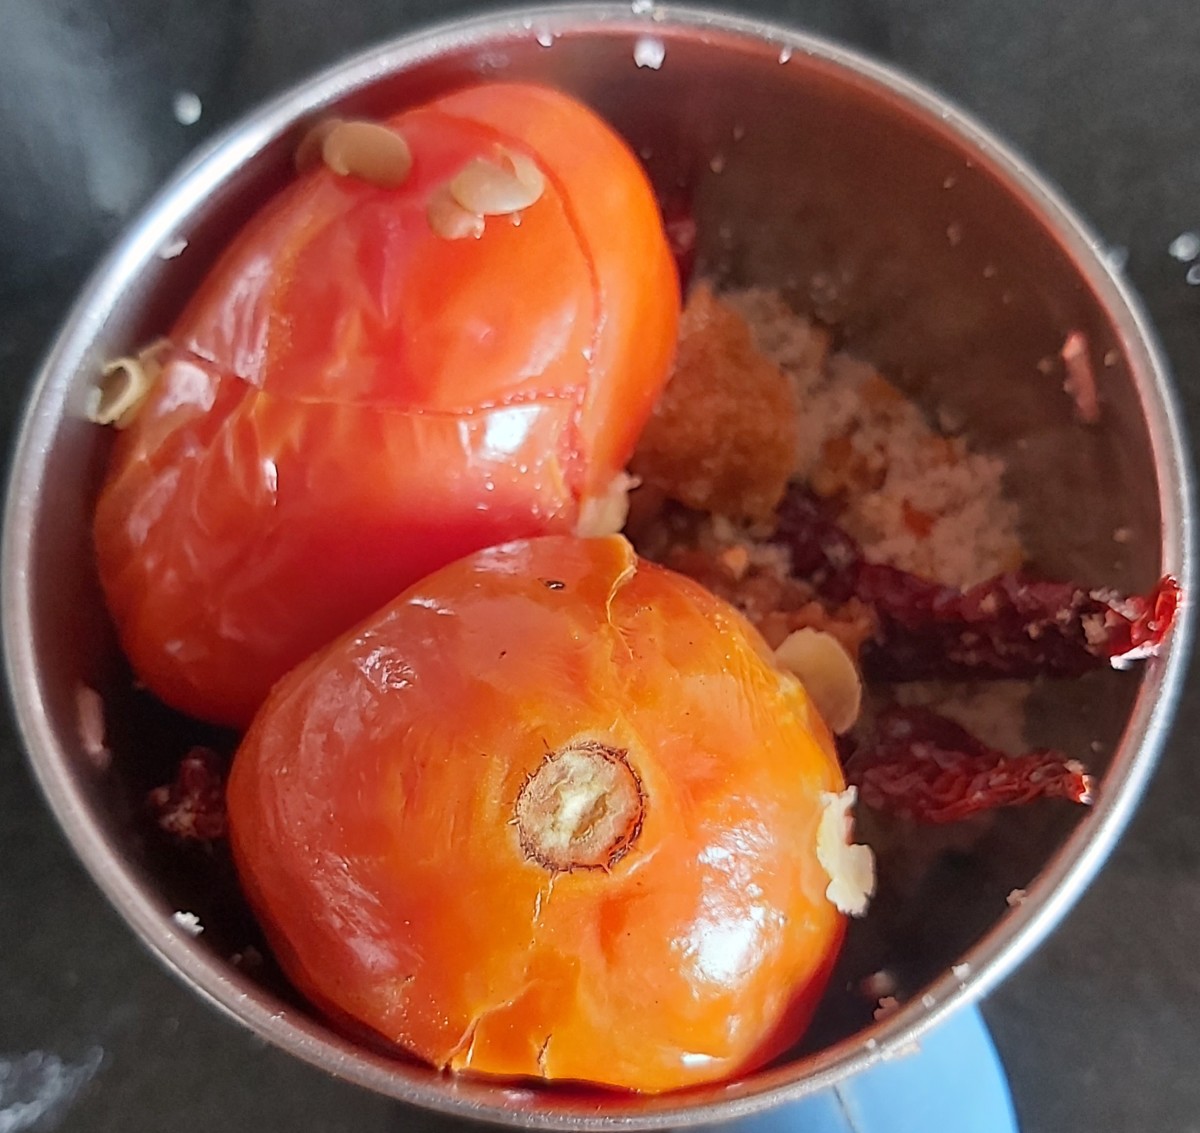 Transfer these tomatoes to the mixer jar.